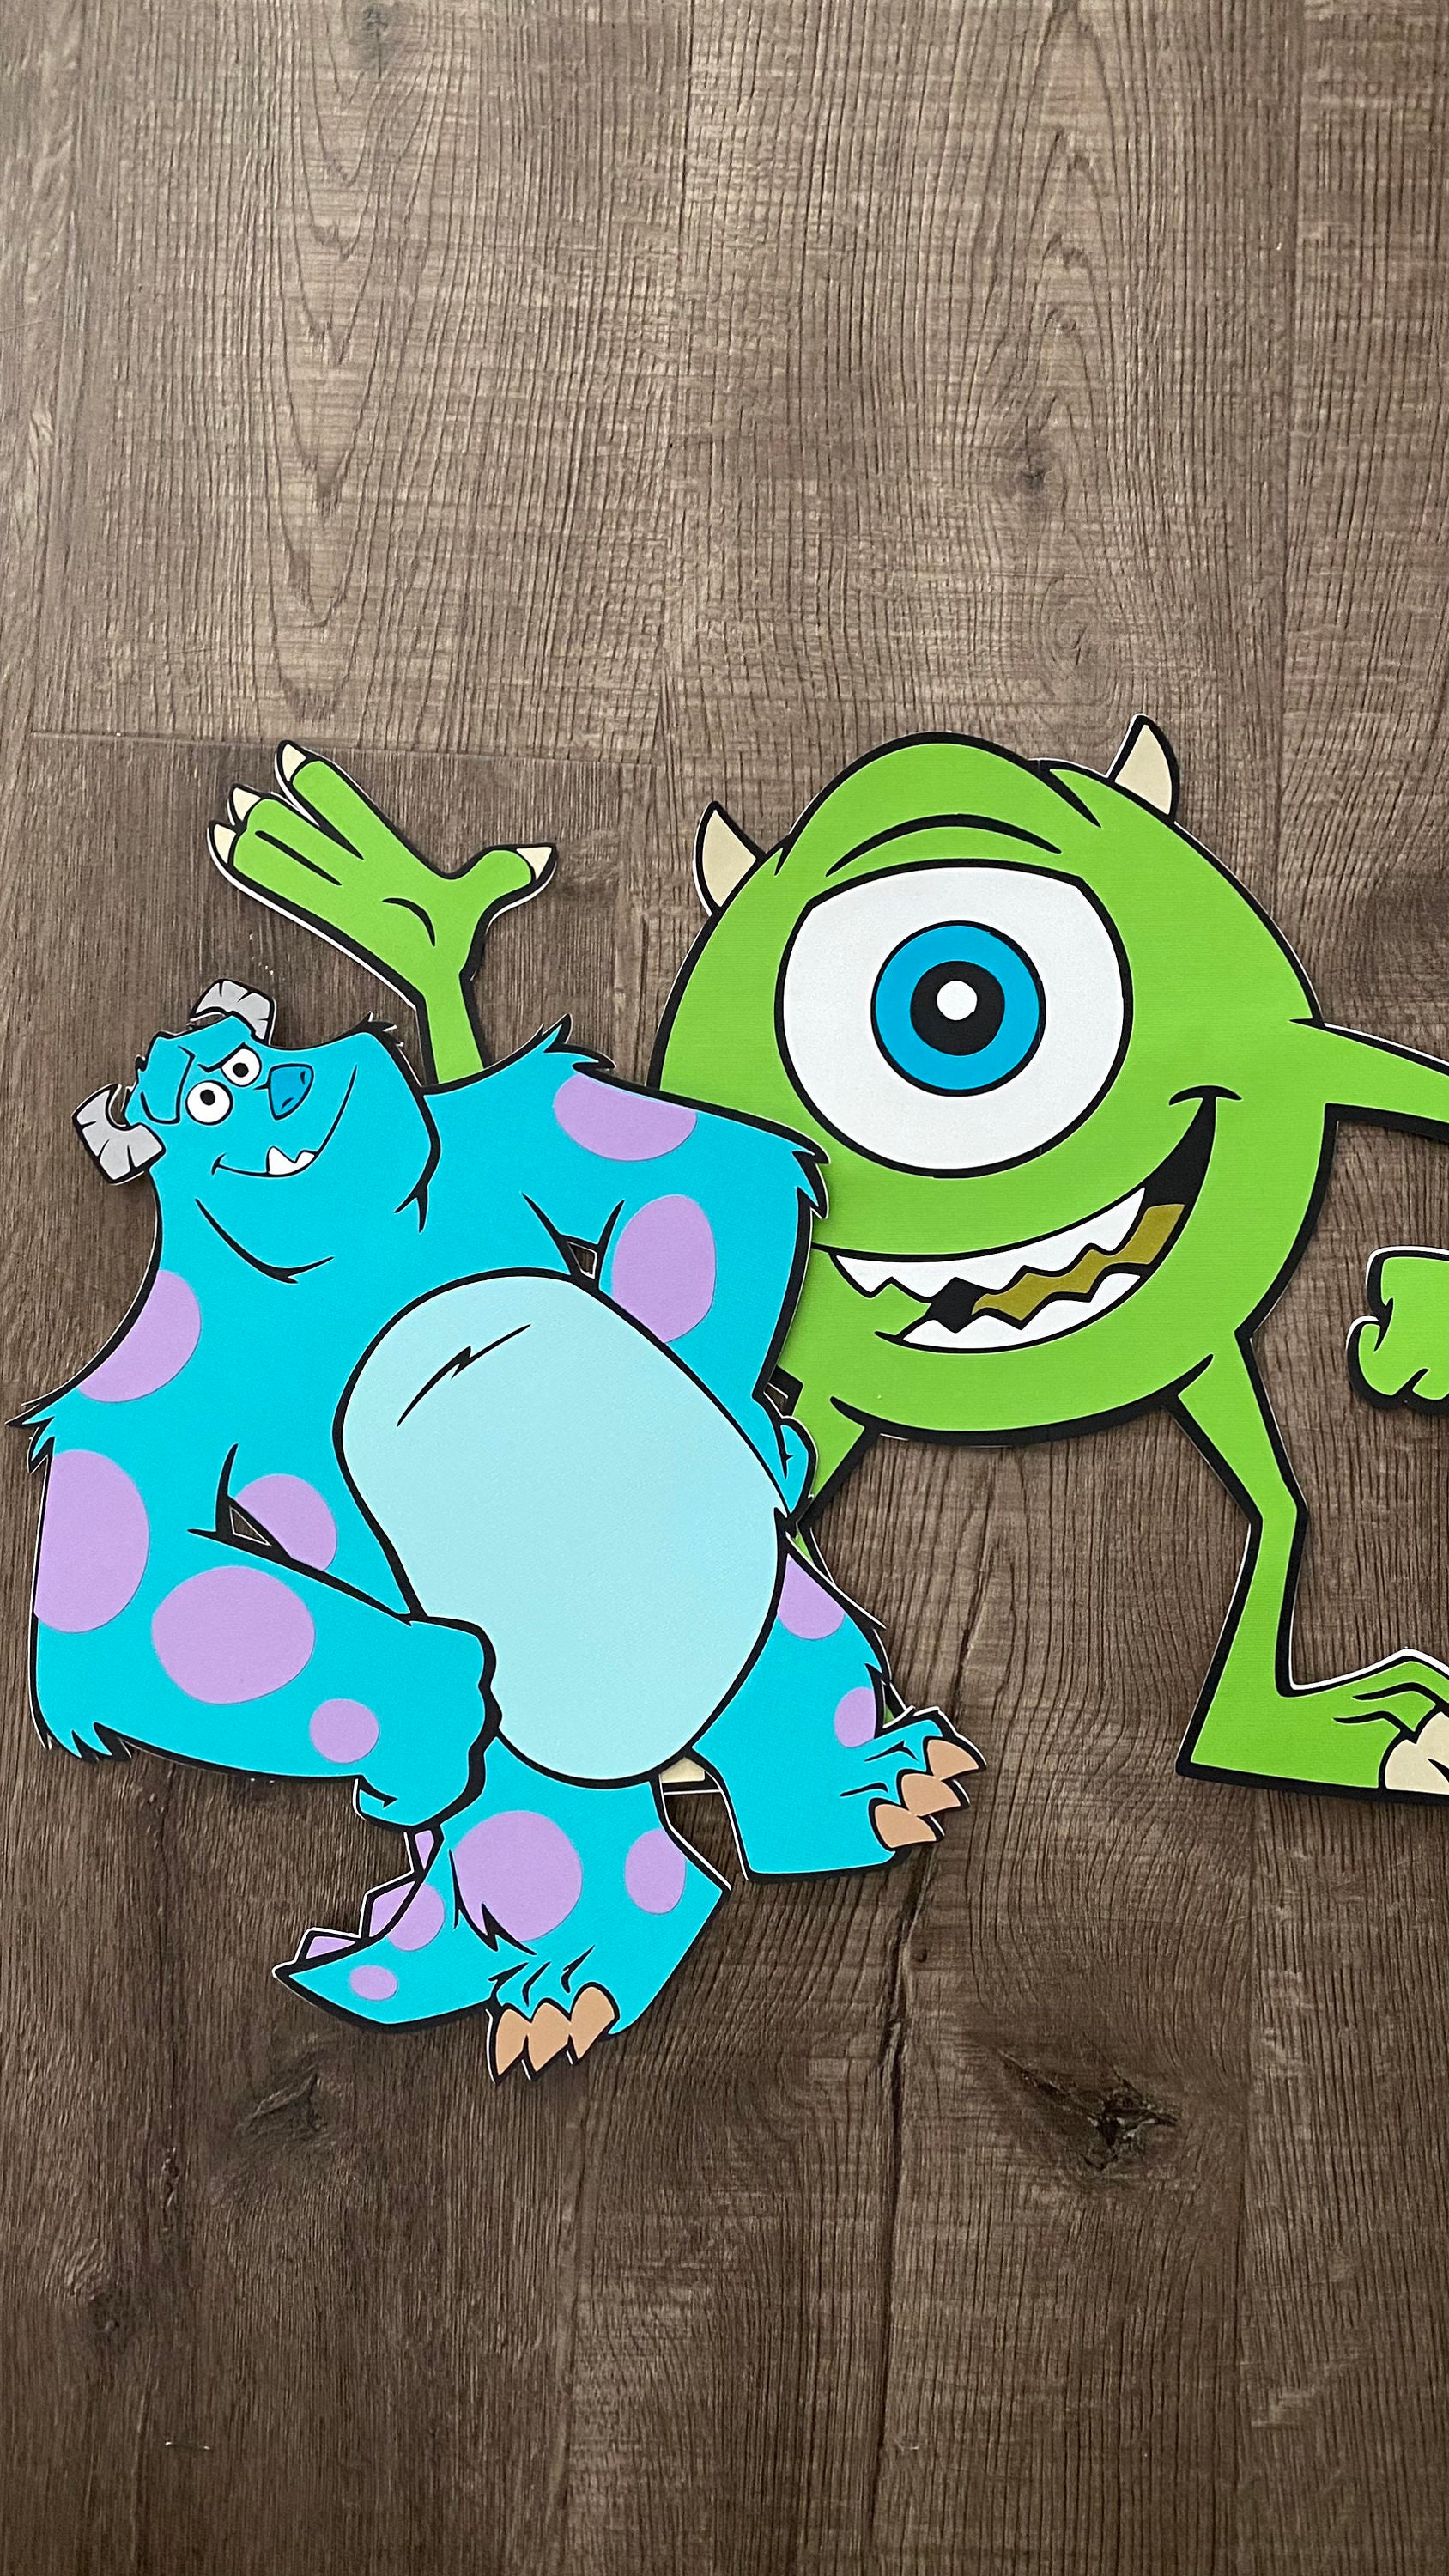 15 Inches Monster Cutouts Monster Backdrop Character Table - Etsy.de